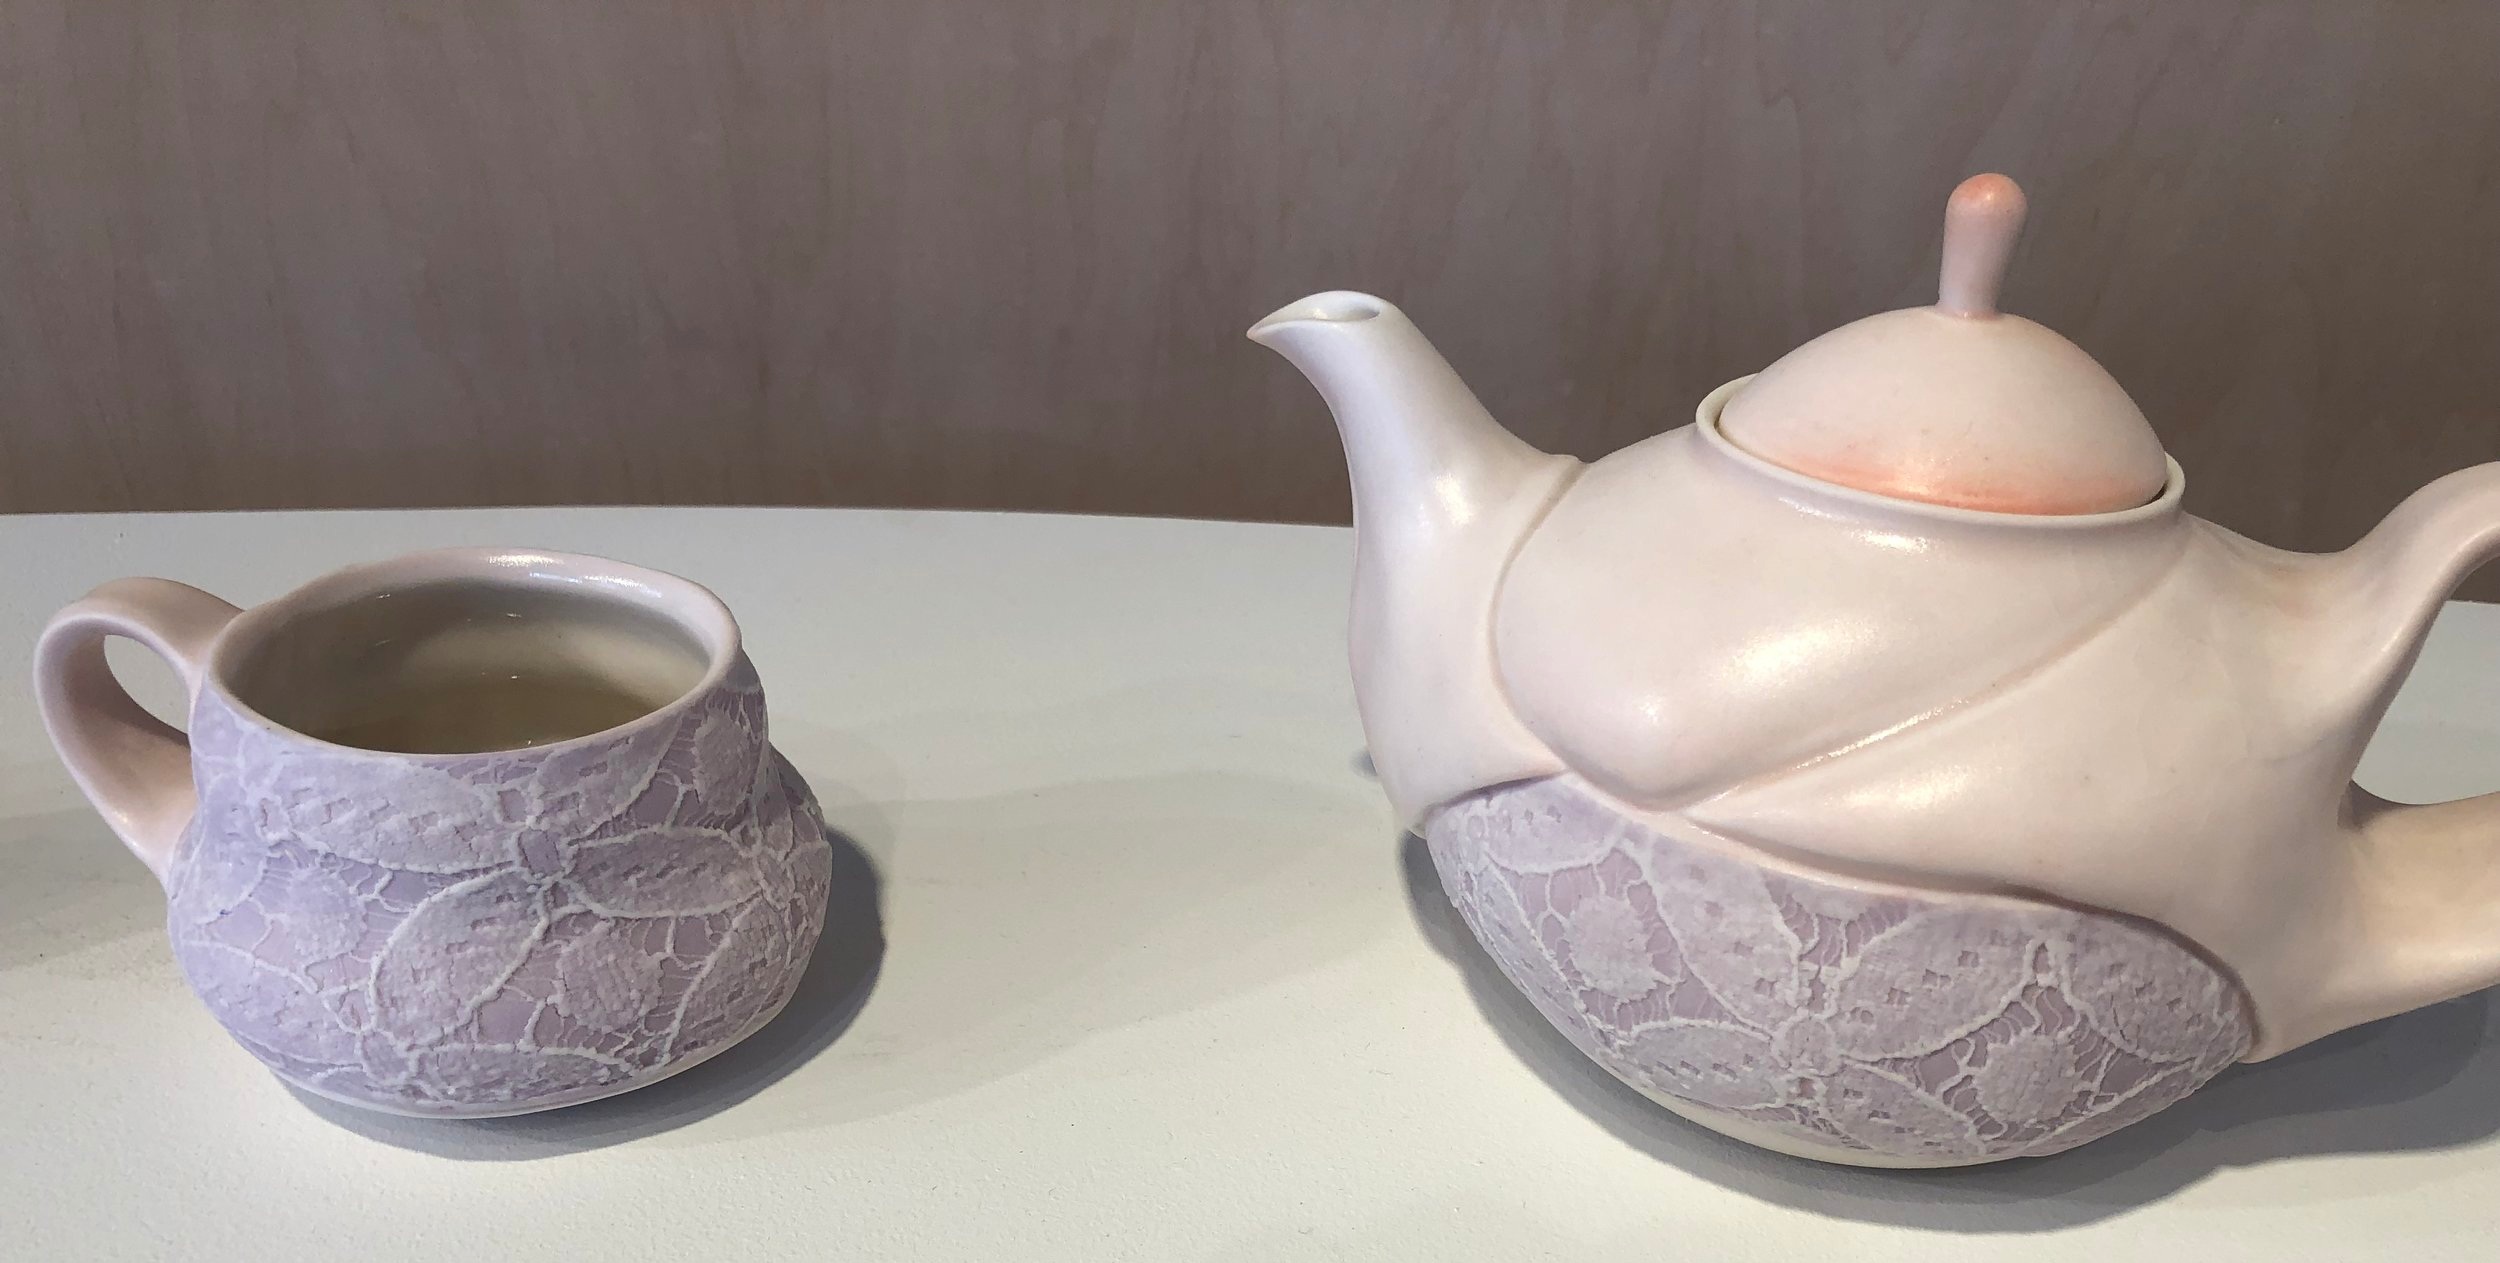  exhibition of  samantha briegel ’s work, included these ceramics topped with lace.  